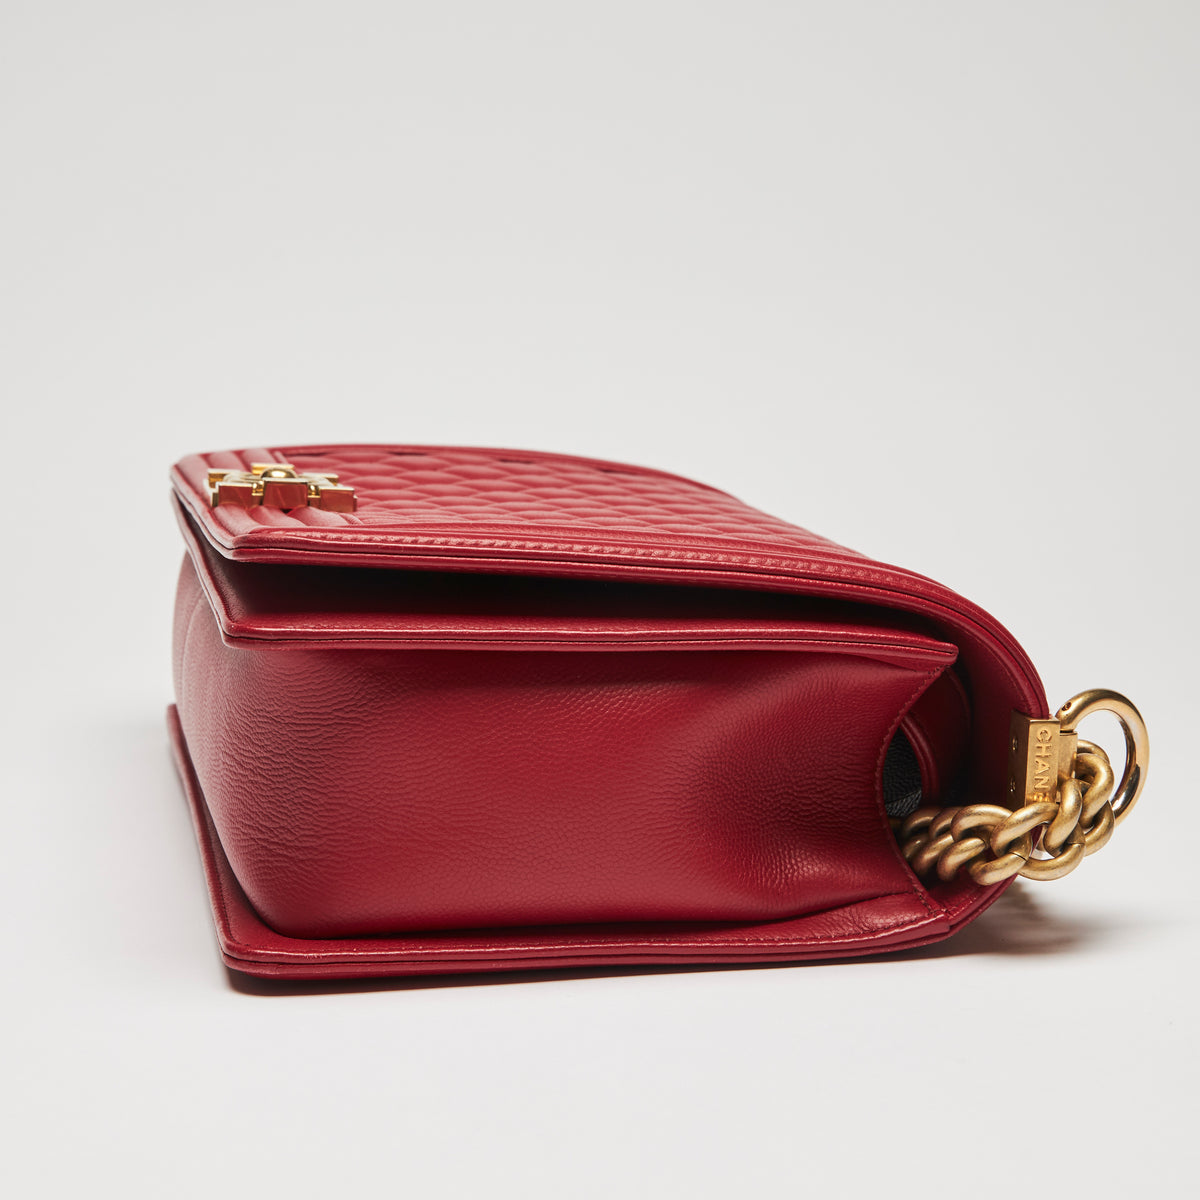 Excellent Pre-Loved Large Red Grained Calfskin Leather Structured Flap Bag with Aged Gold Hardware and Shoulder Chain. (side)